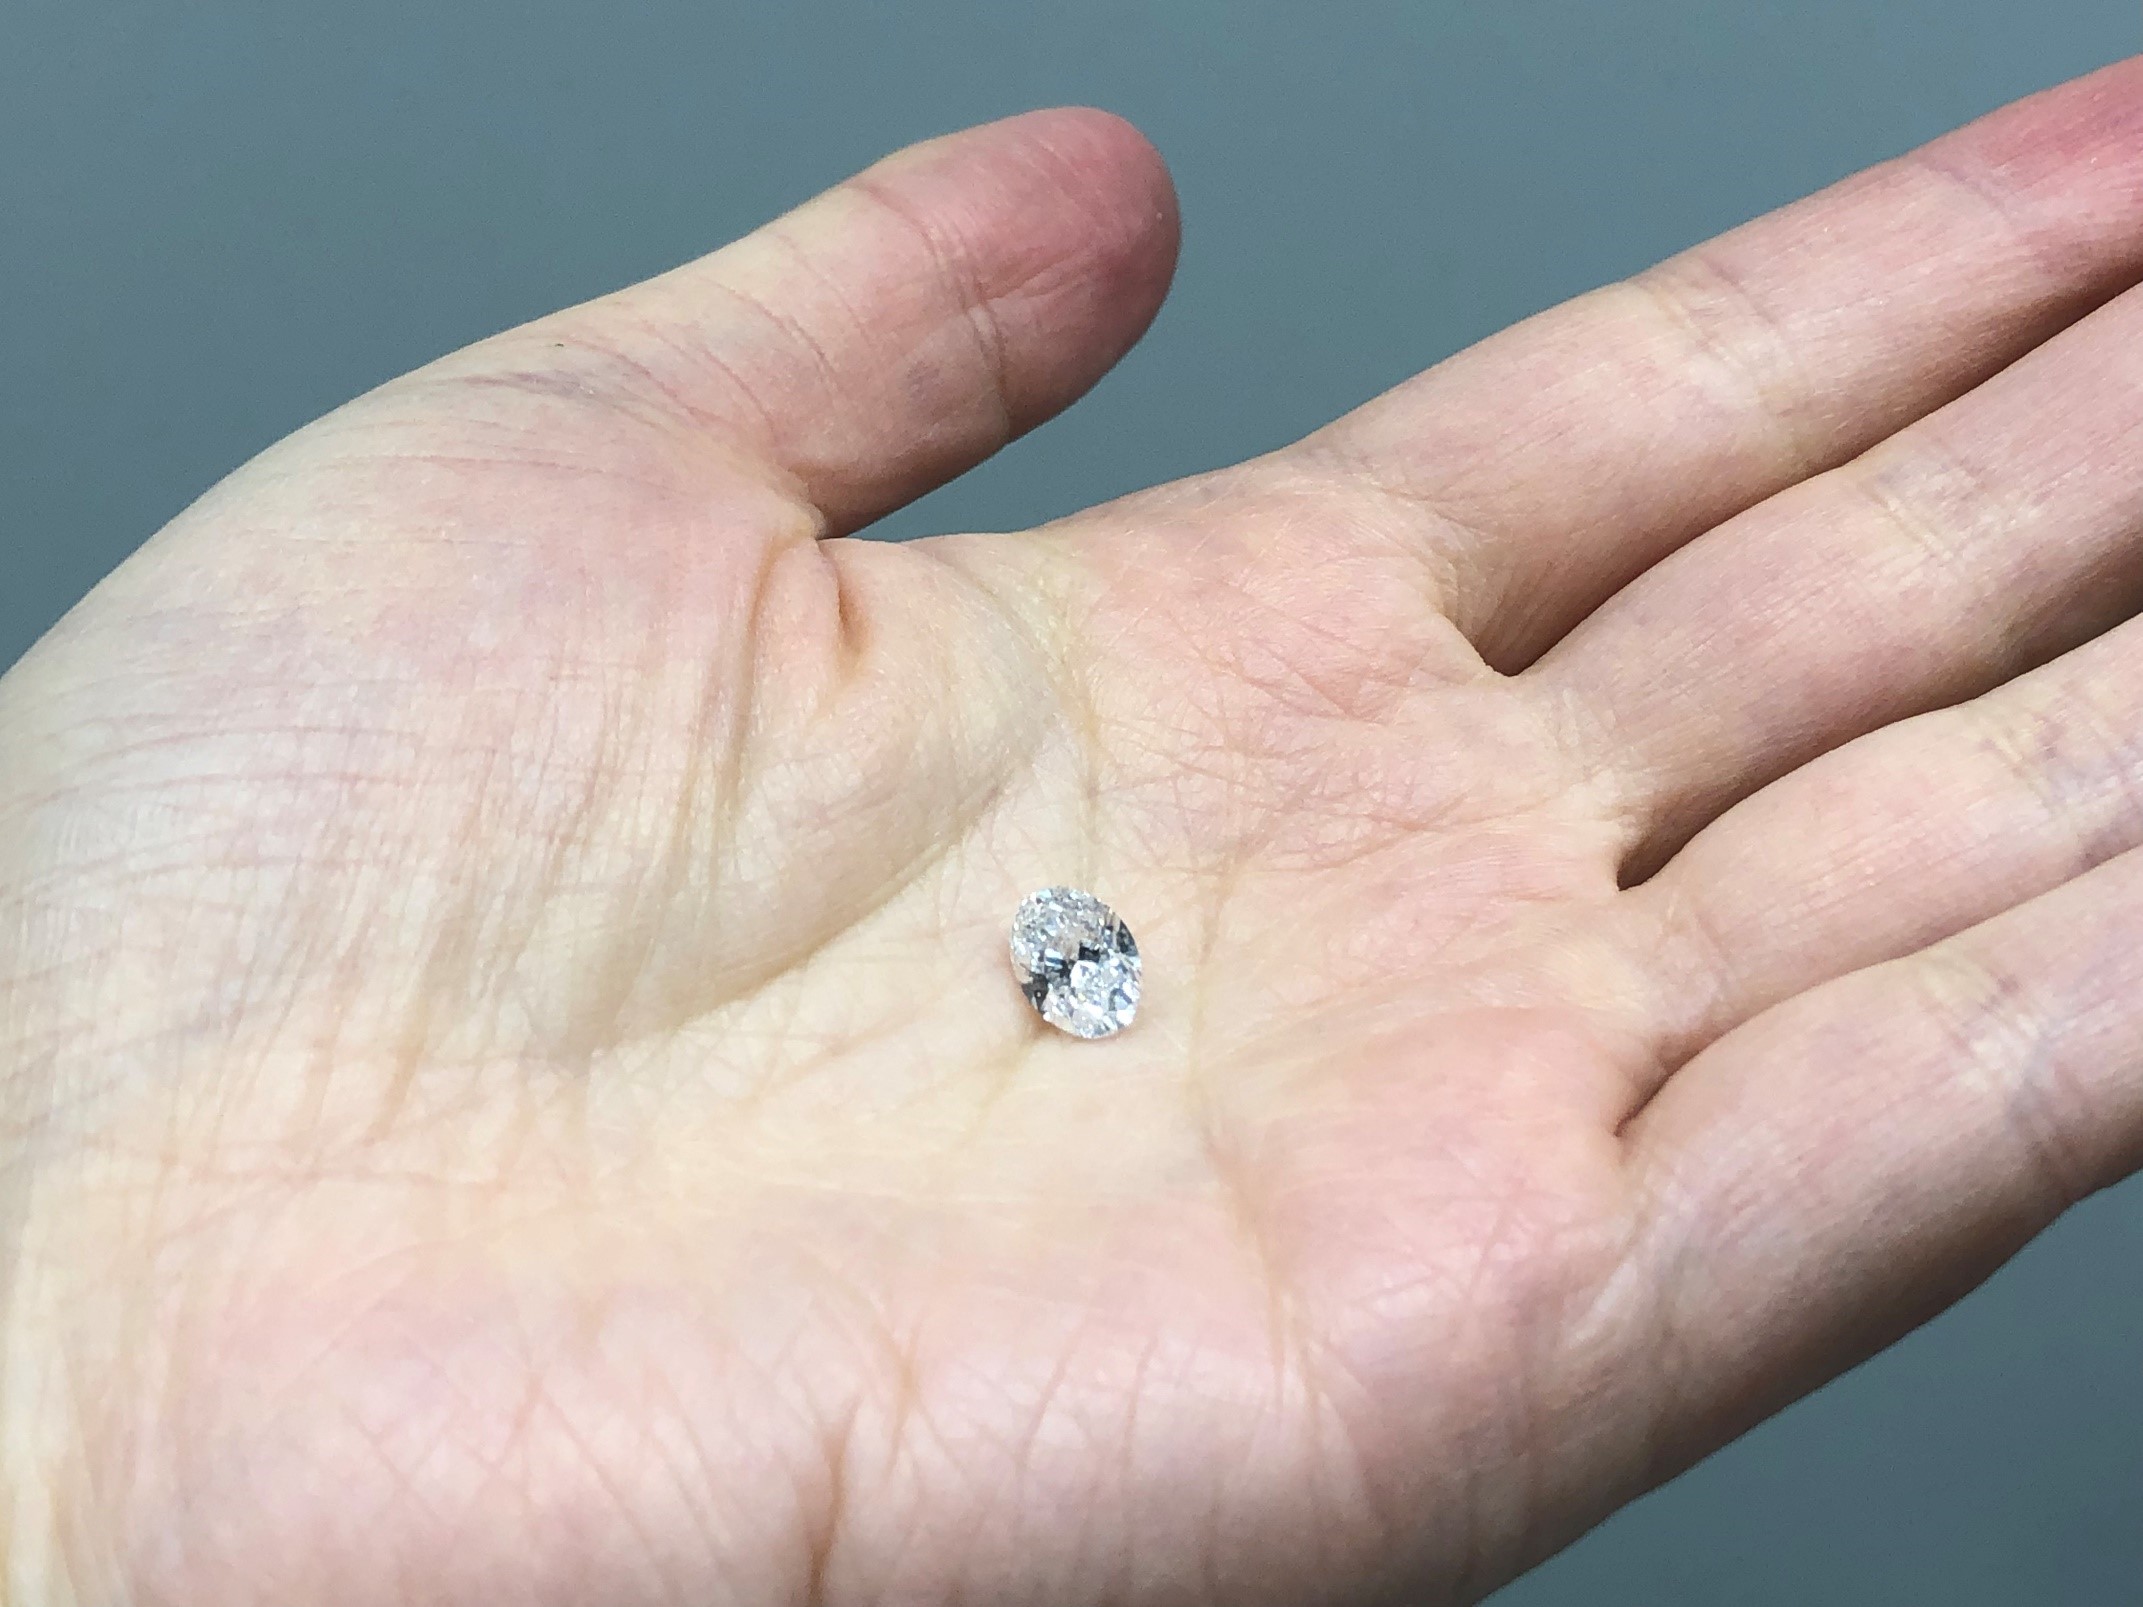 A rare diamond is offering a glimpse into a possibly watery world inside the Earth